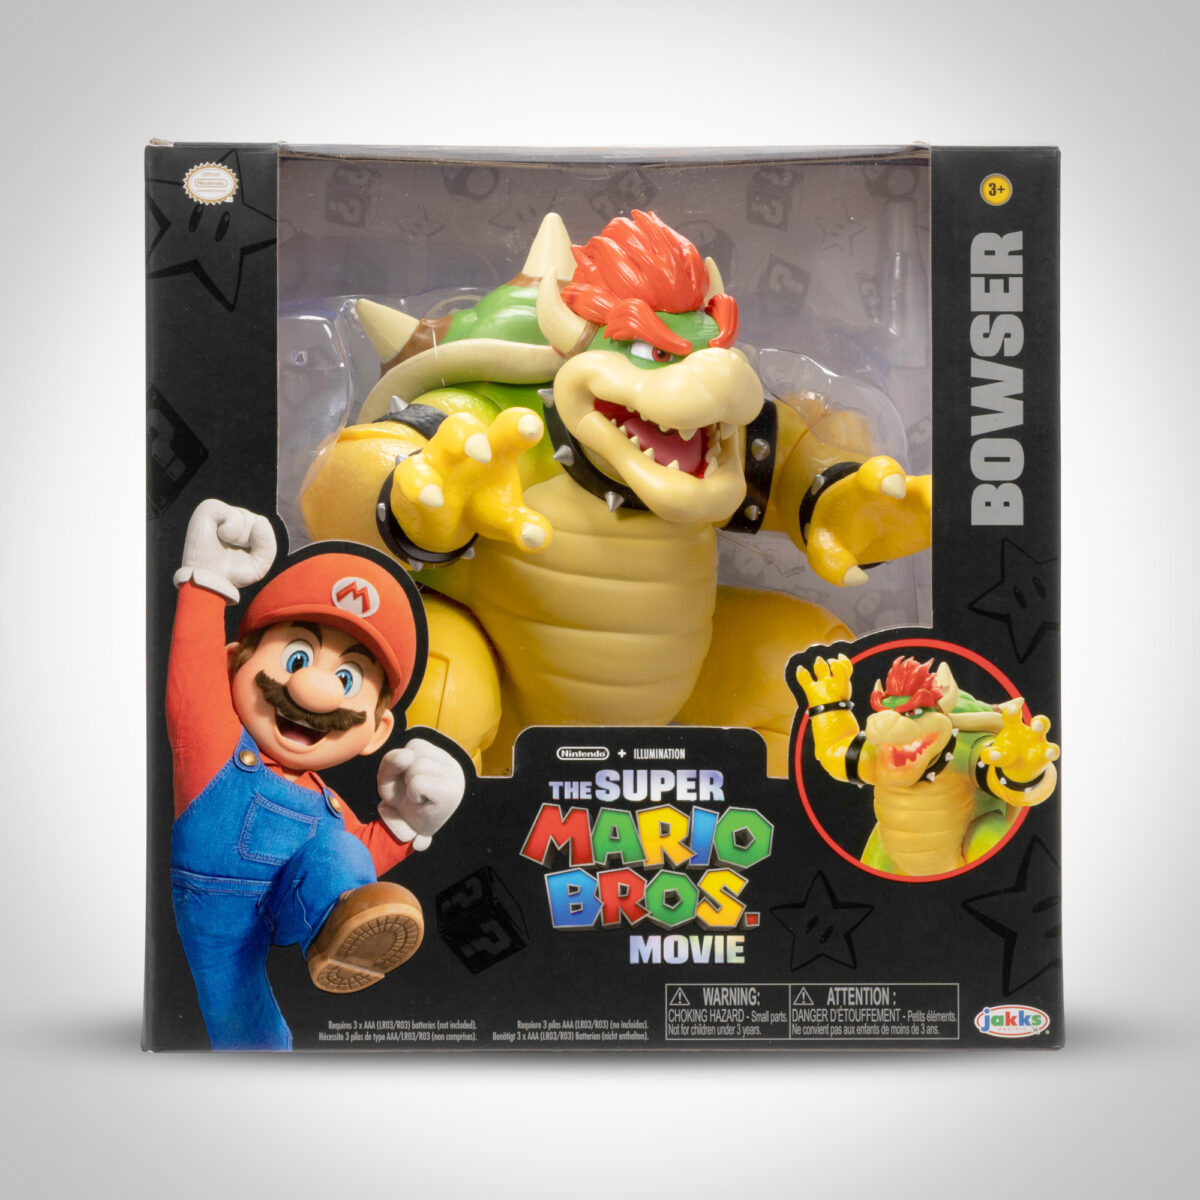 BOWSER WITH FIRE BREATHING EFFECTS